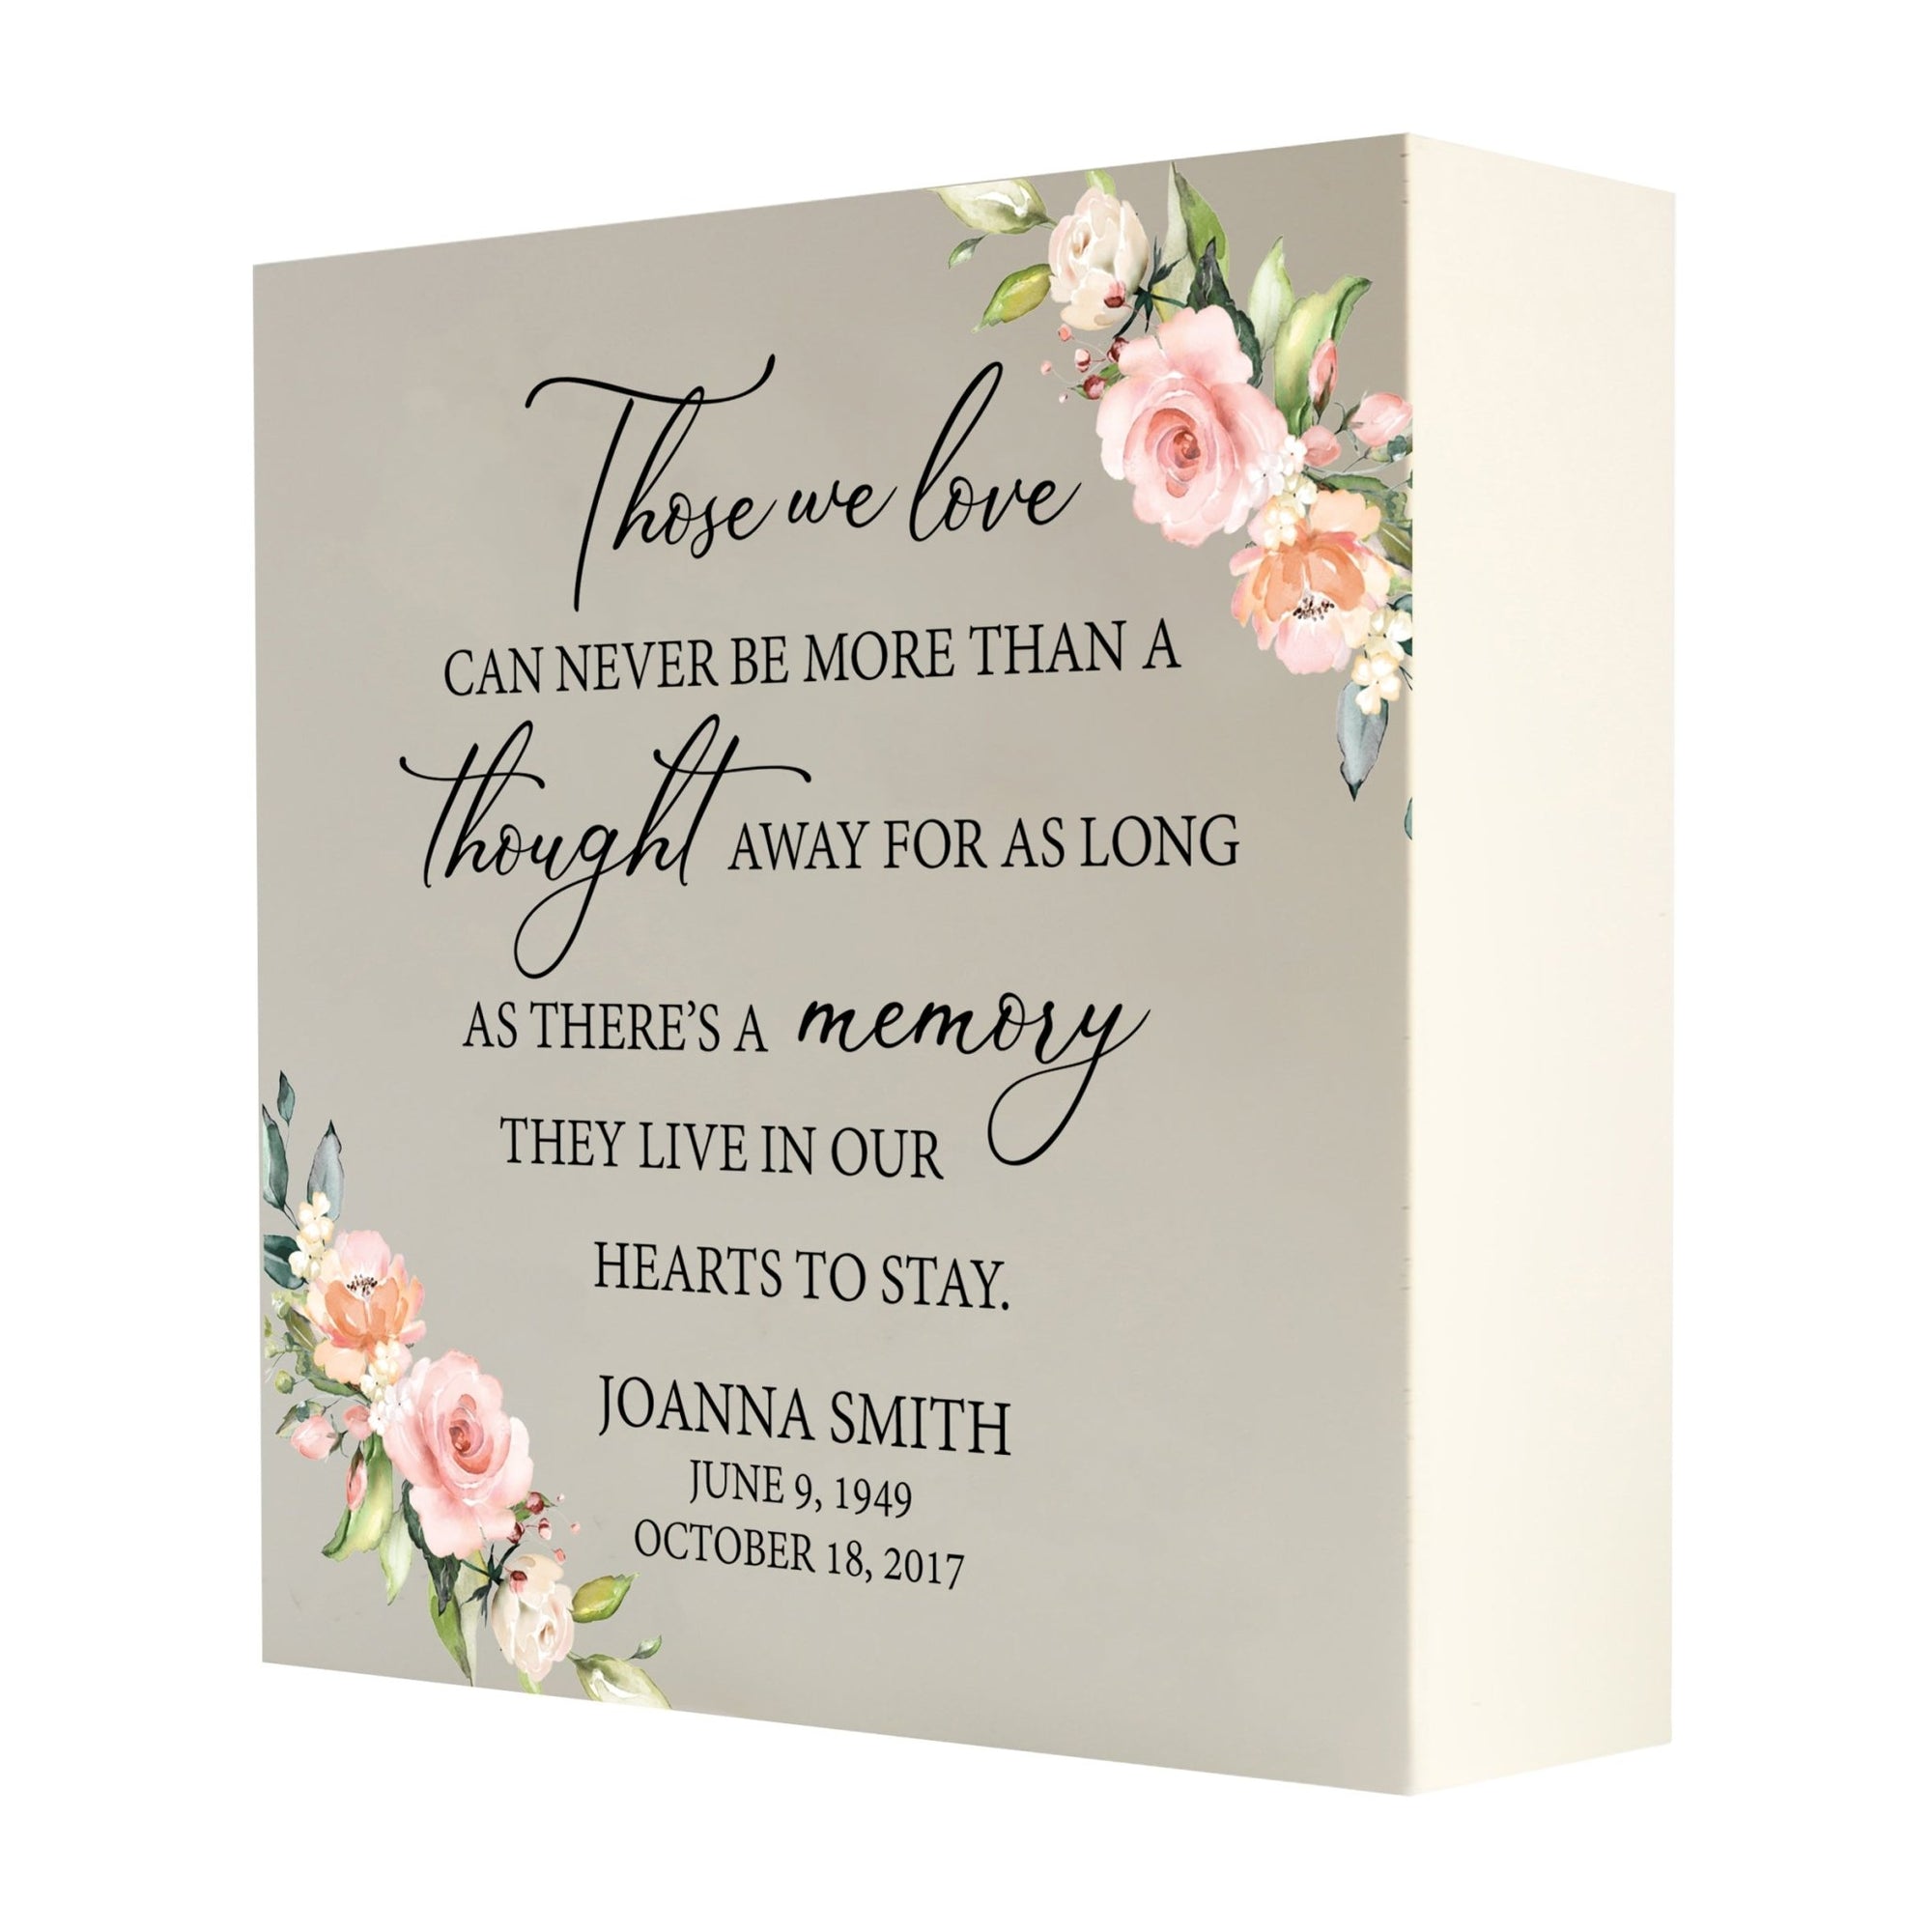 Personalized Modern Inspirational Memorial Wooden Shadow Box and Urn 10x10 holds 189 cu in of Human Ashes - Those We Love Can Never (Ivory) - LifeSong Milestones